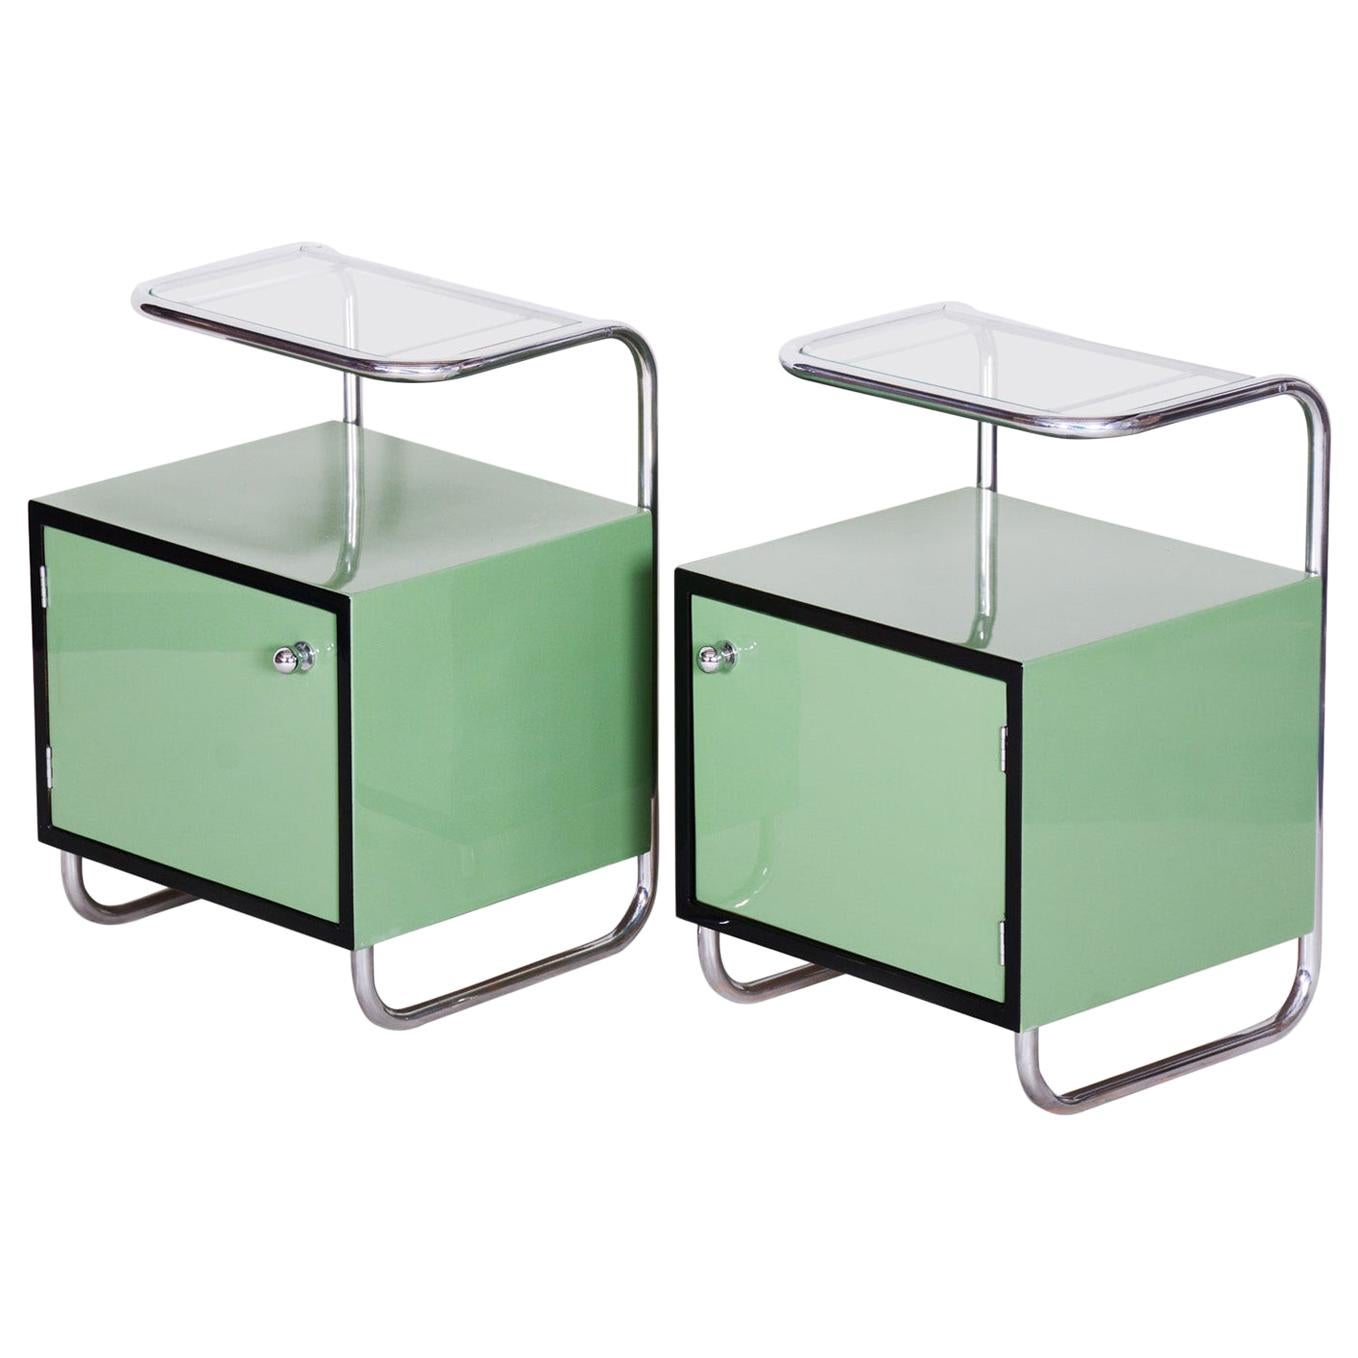 Pair of Green Vintage Bauhaus Bed Side Tables, Vichr, 1930s Glass Removable Desk